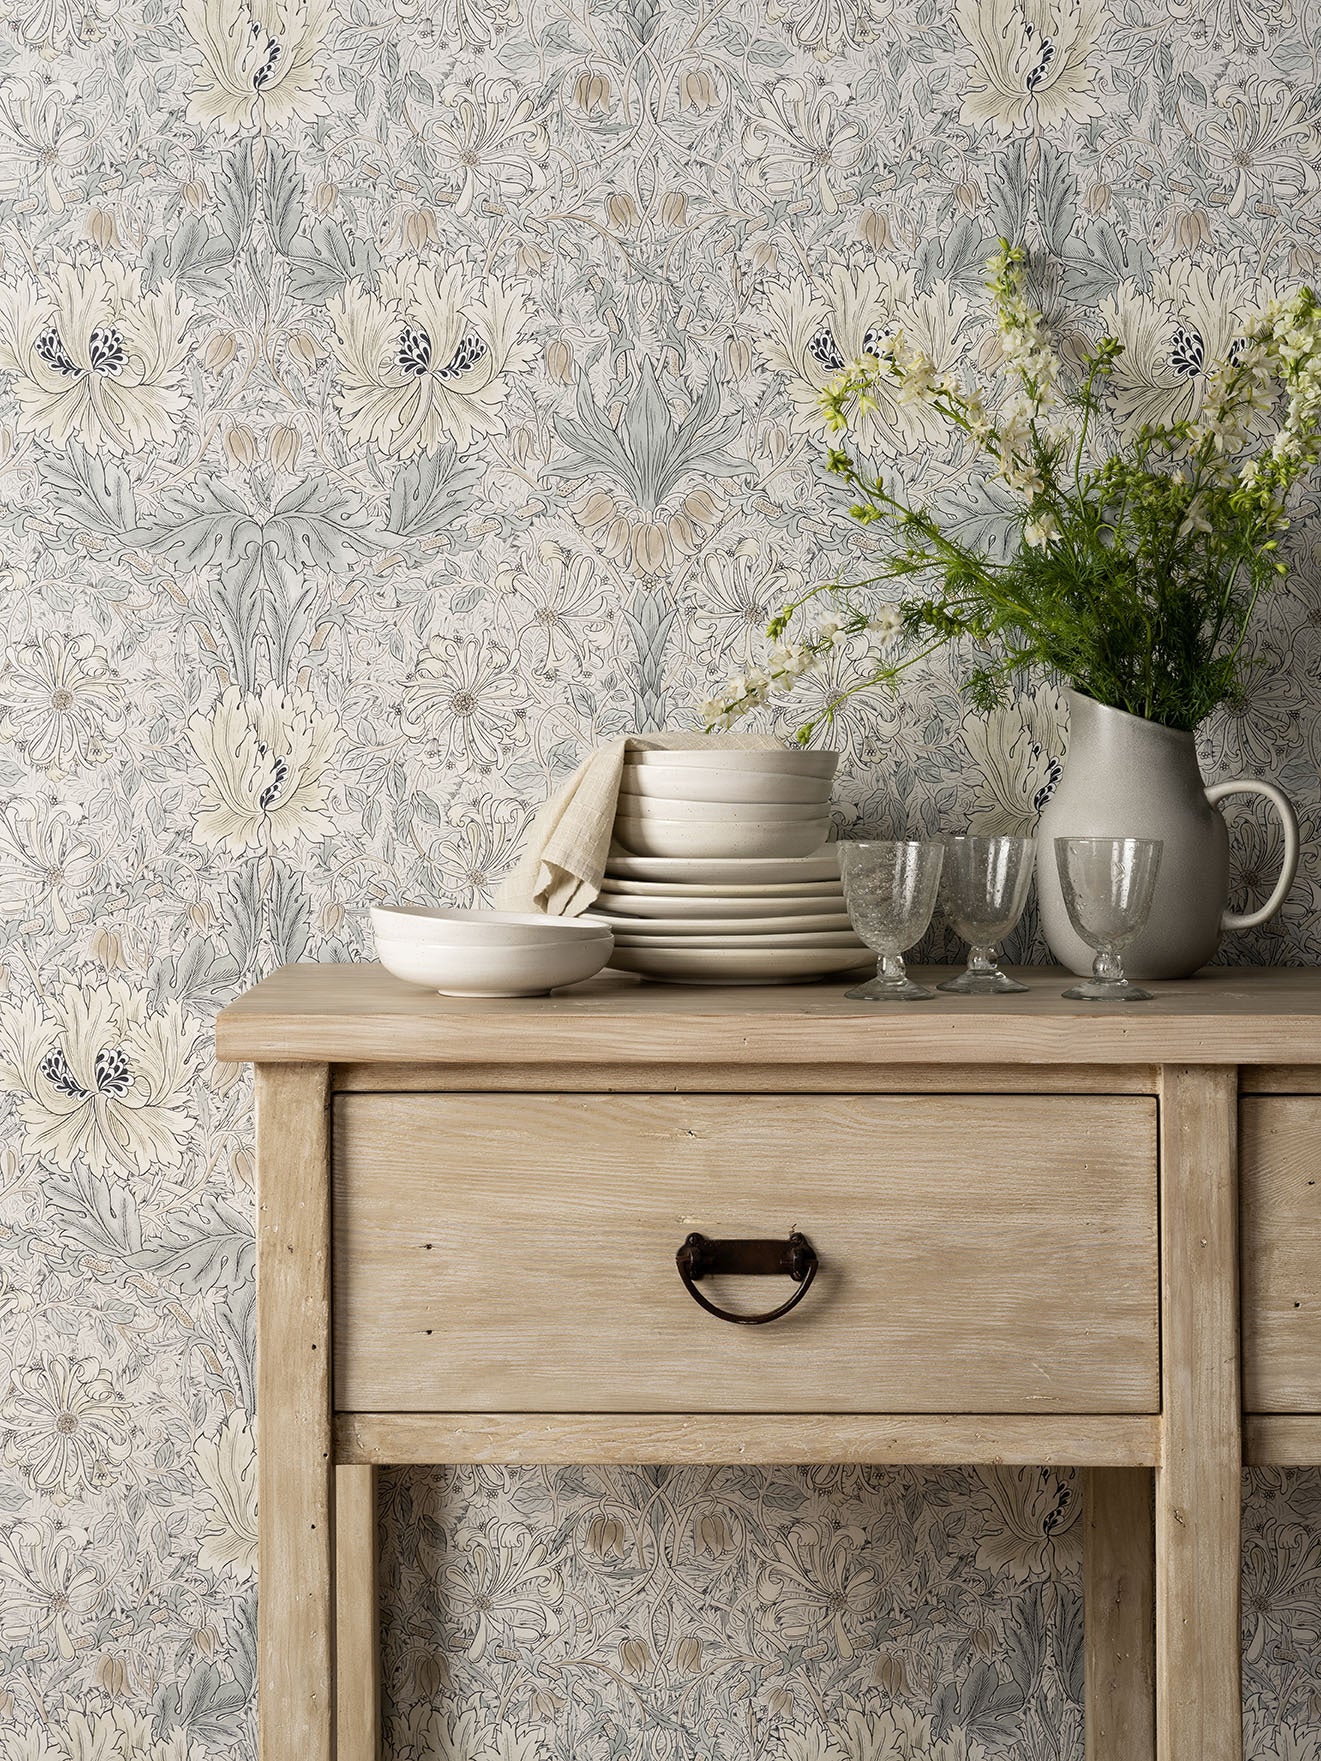 Floral wallpaper behind wood console table decorated with tableware and vase of flowers